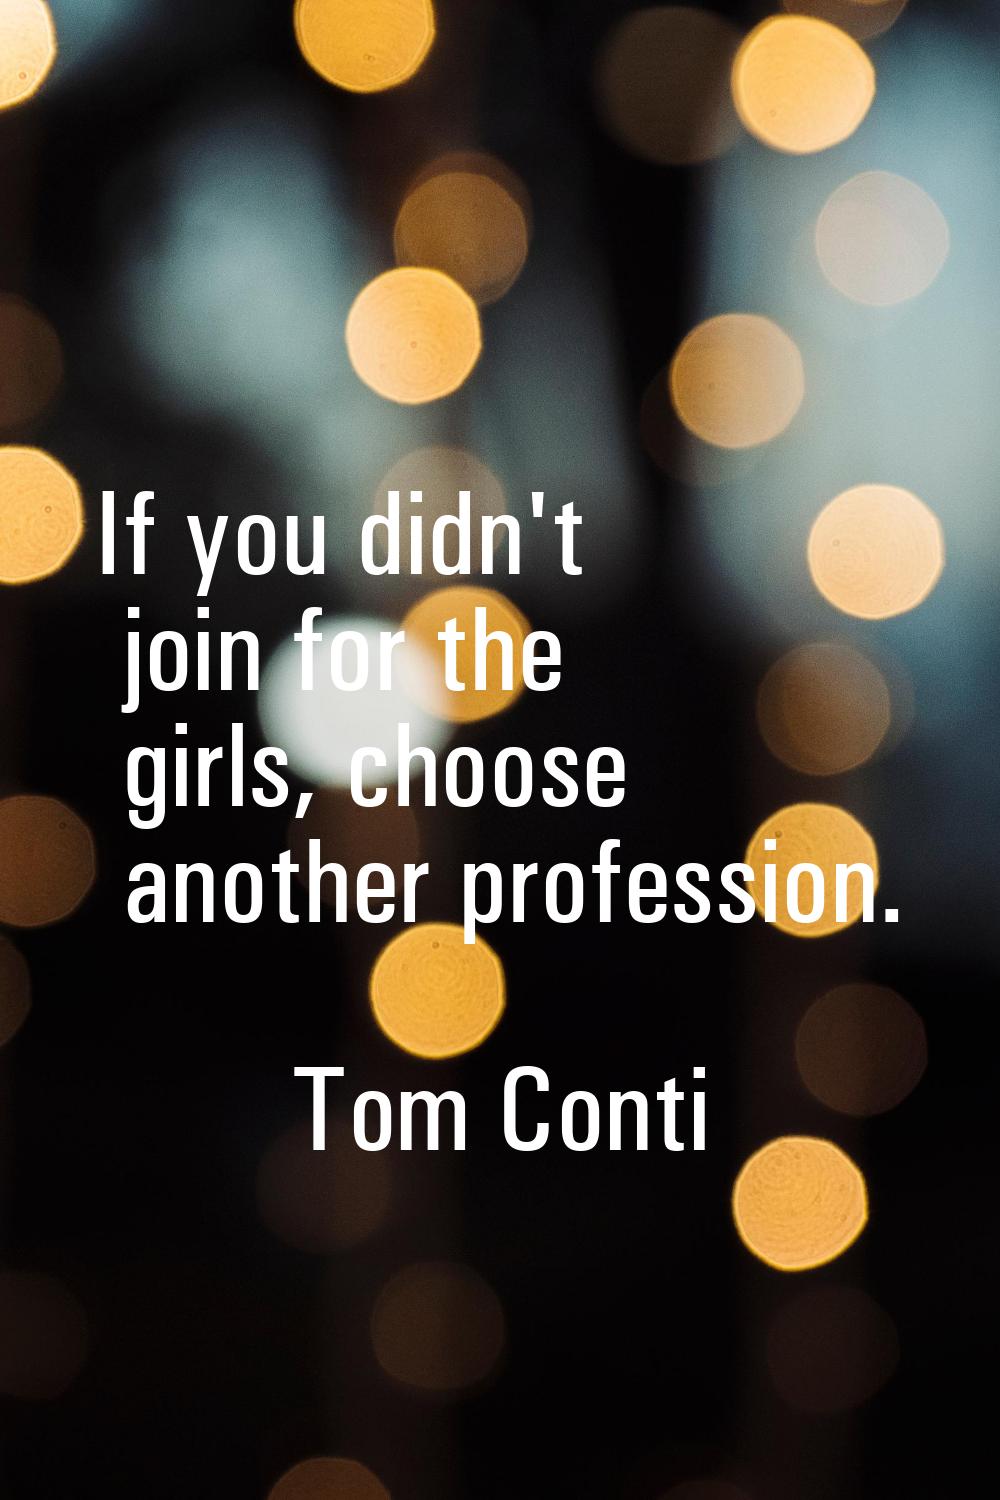 If you didn't join for the girls, choose another profession.